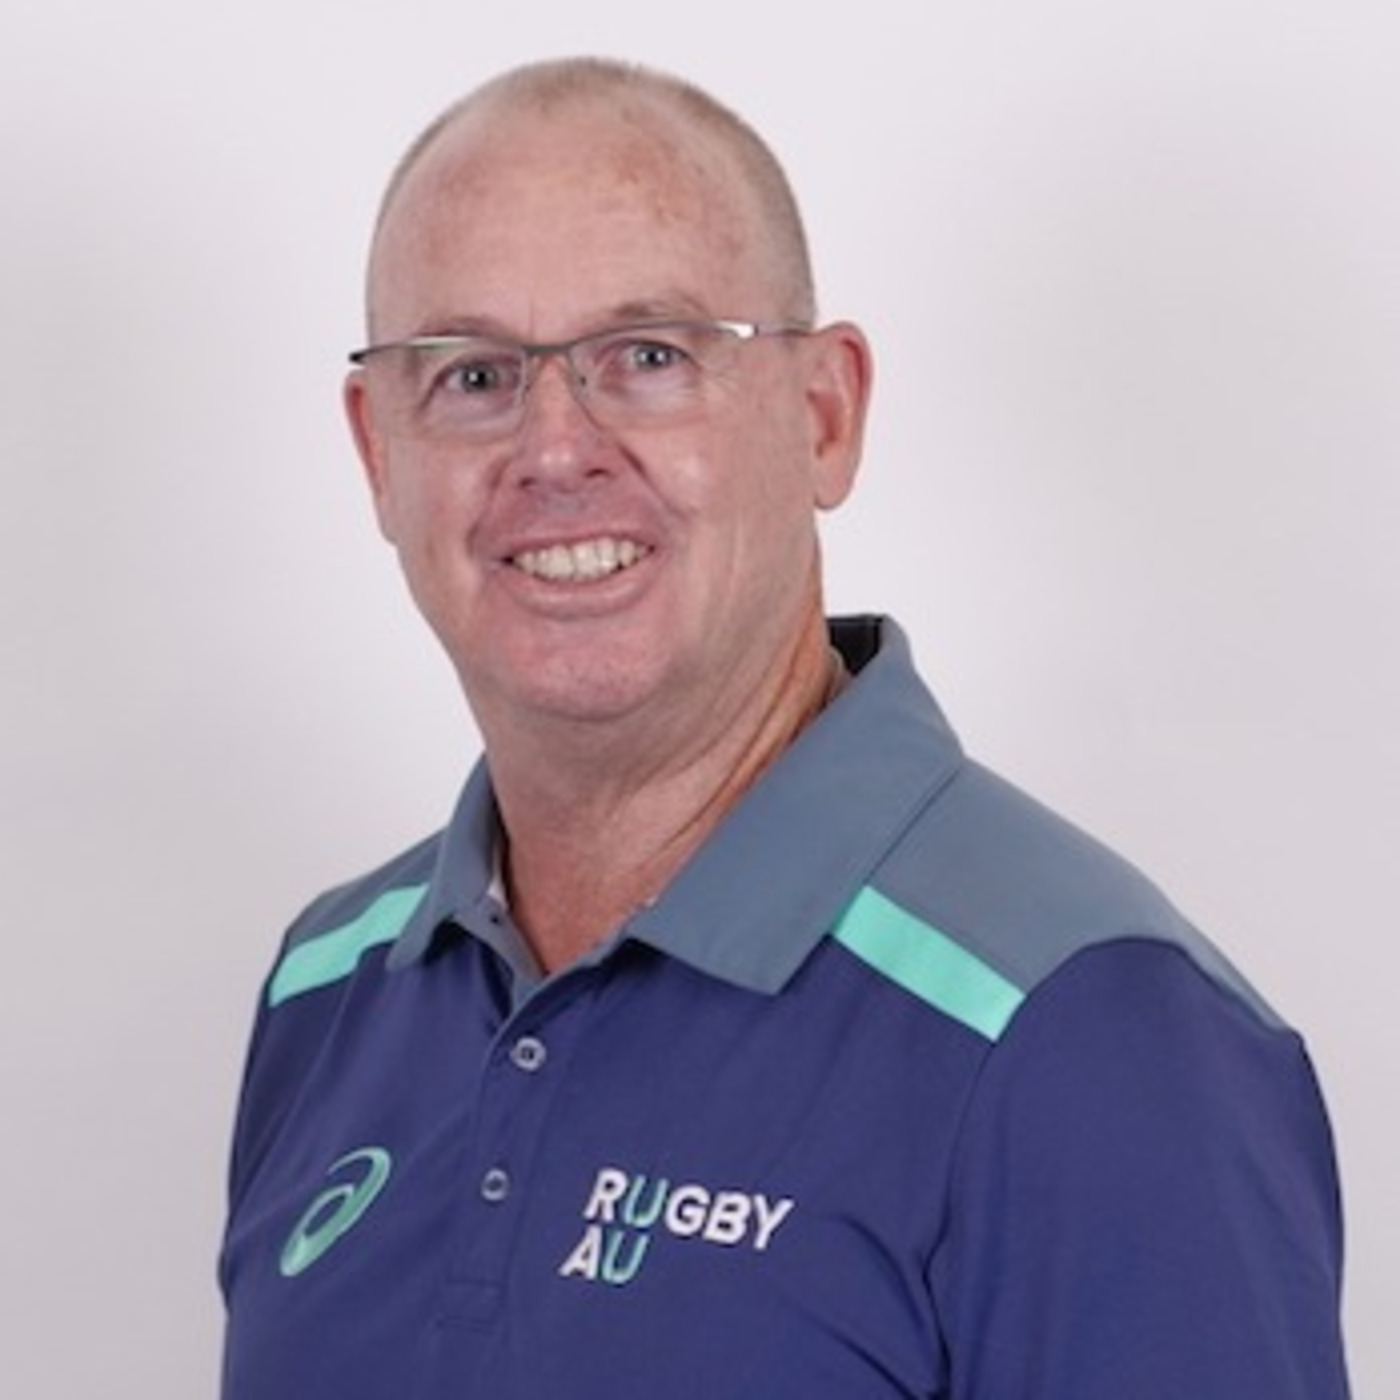 Steve Anderson, Ep 89, DoR at Rugby WA and Author of “A Coach's Journey